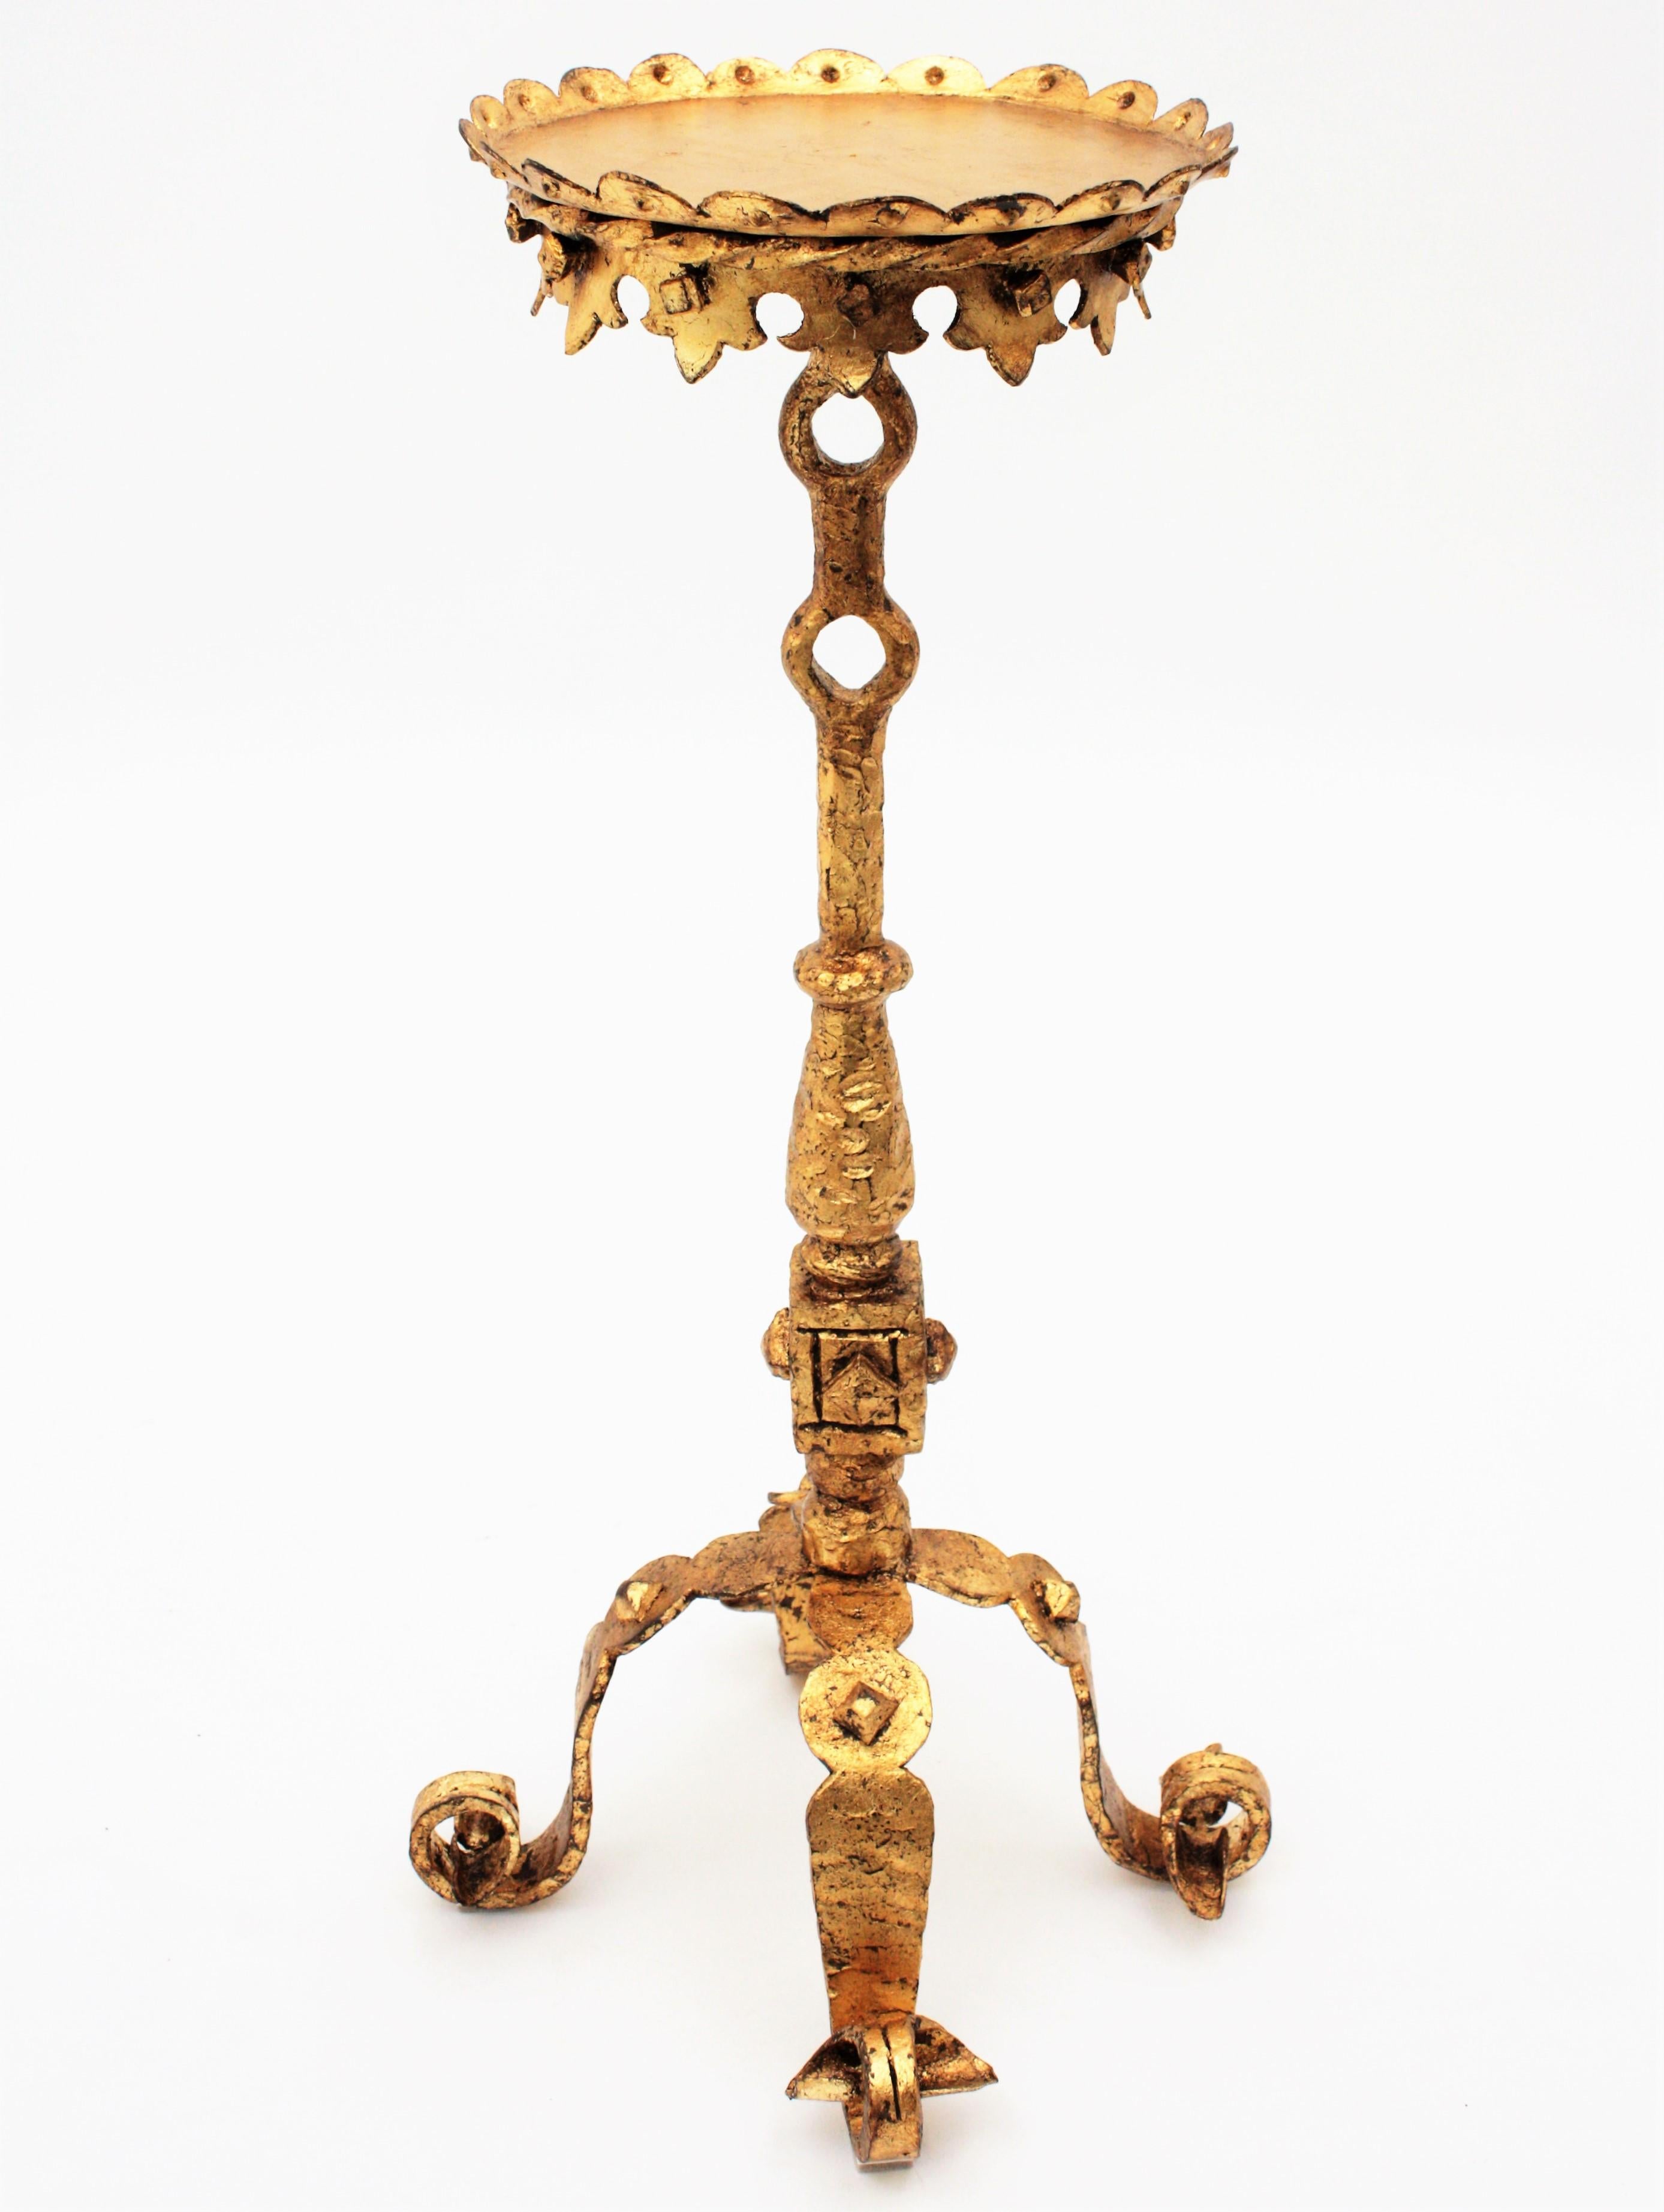 Unusual hand-hammered iron gold leaf gilded Gothic style side table, end table or stand with scroll motifs, Spain, 1920s.
This richly decorated gueridon stands on a four feet scrolled base, it has an scalloped round top and it has beautiful hammered